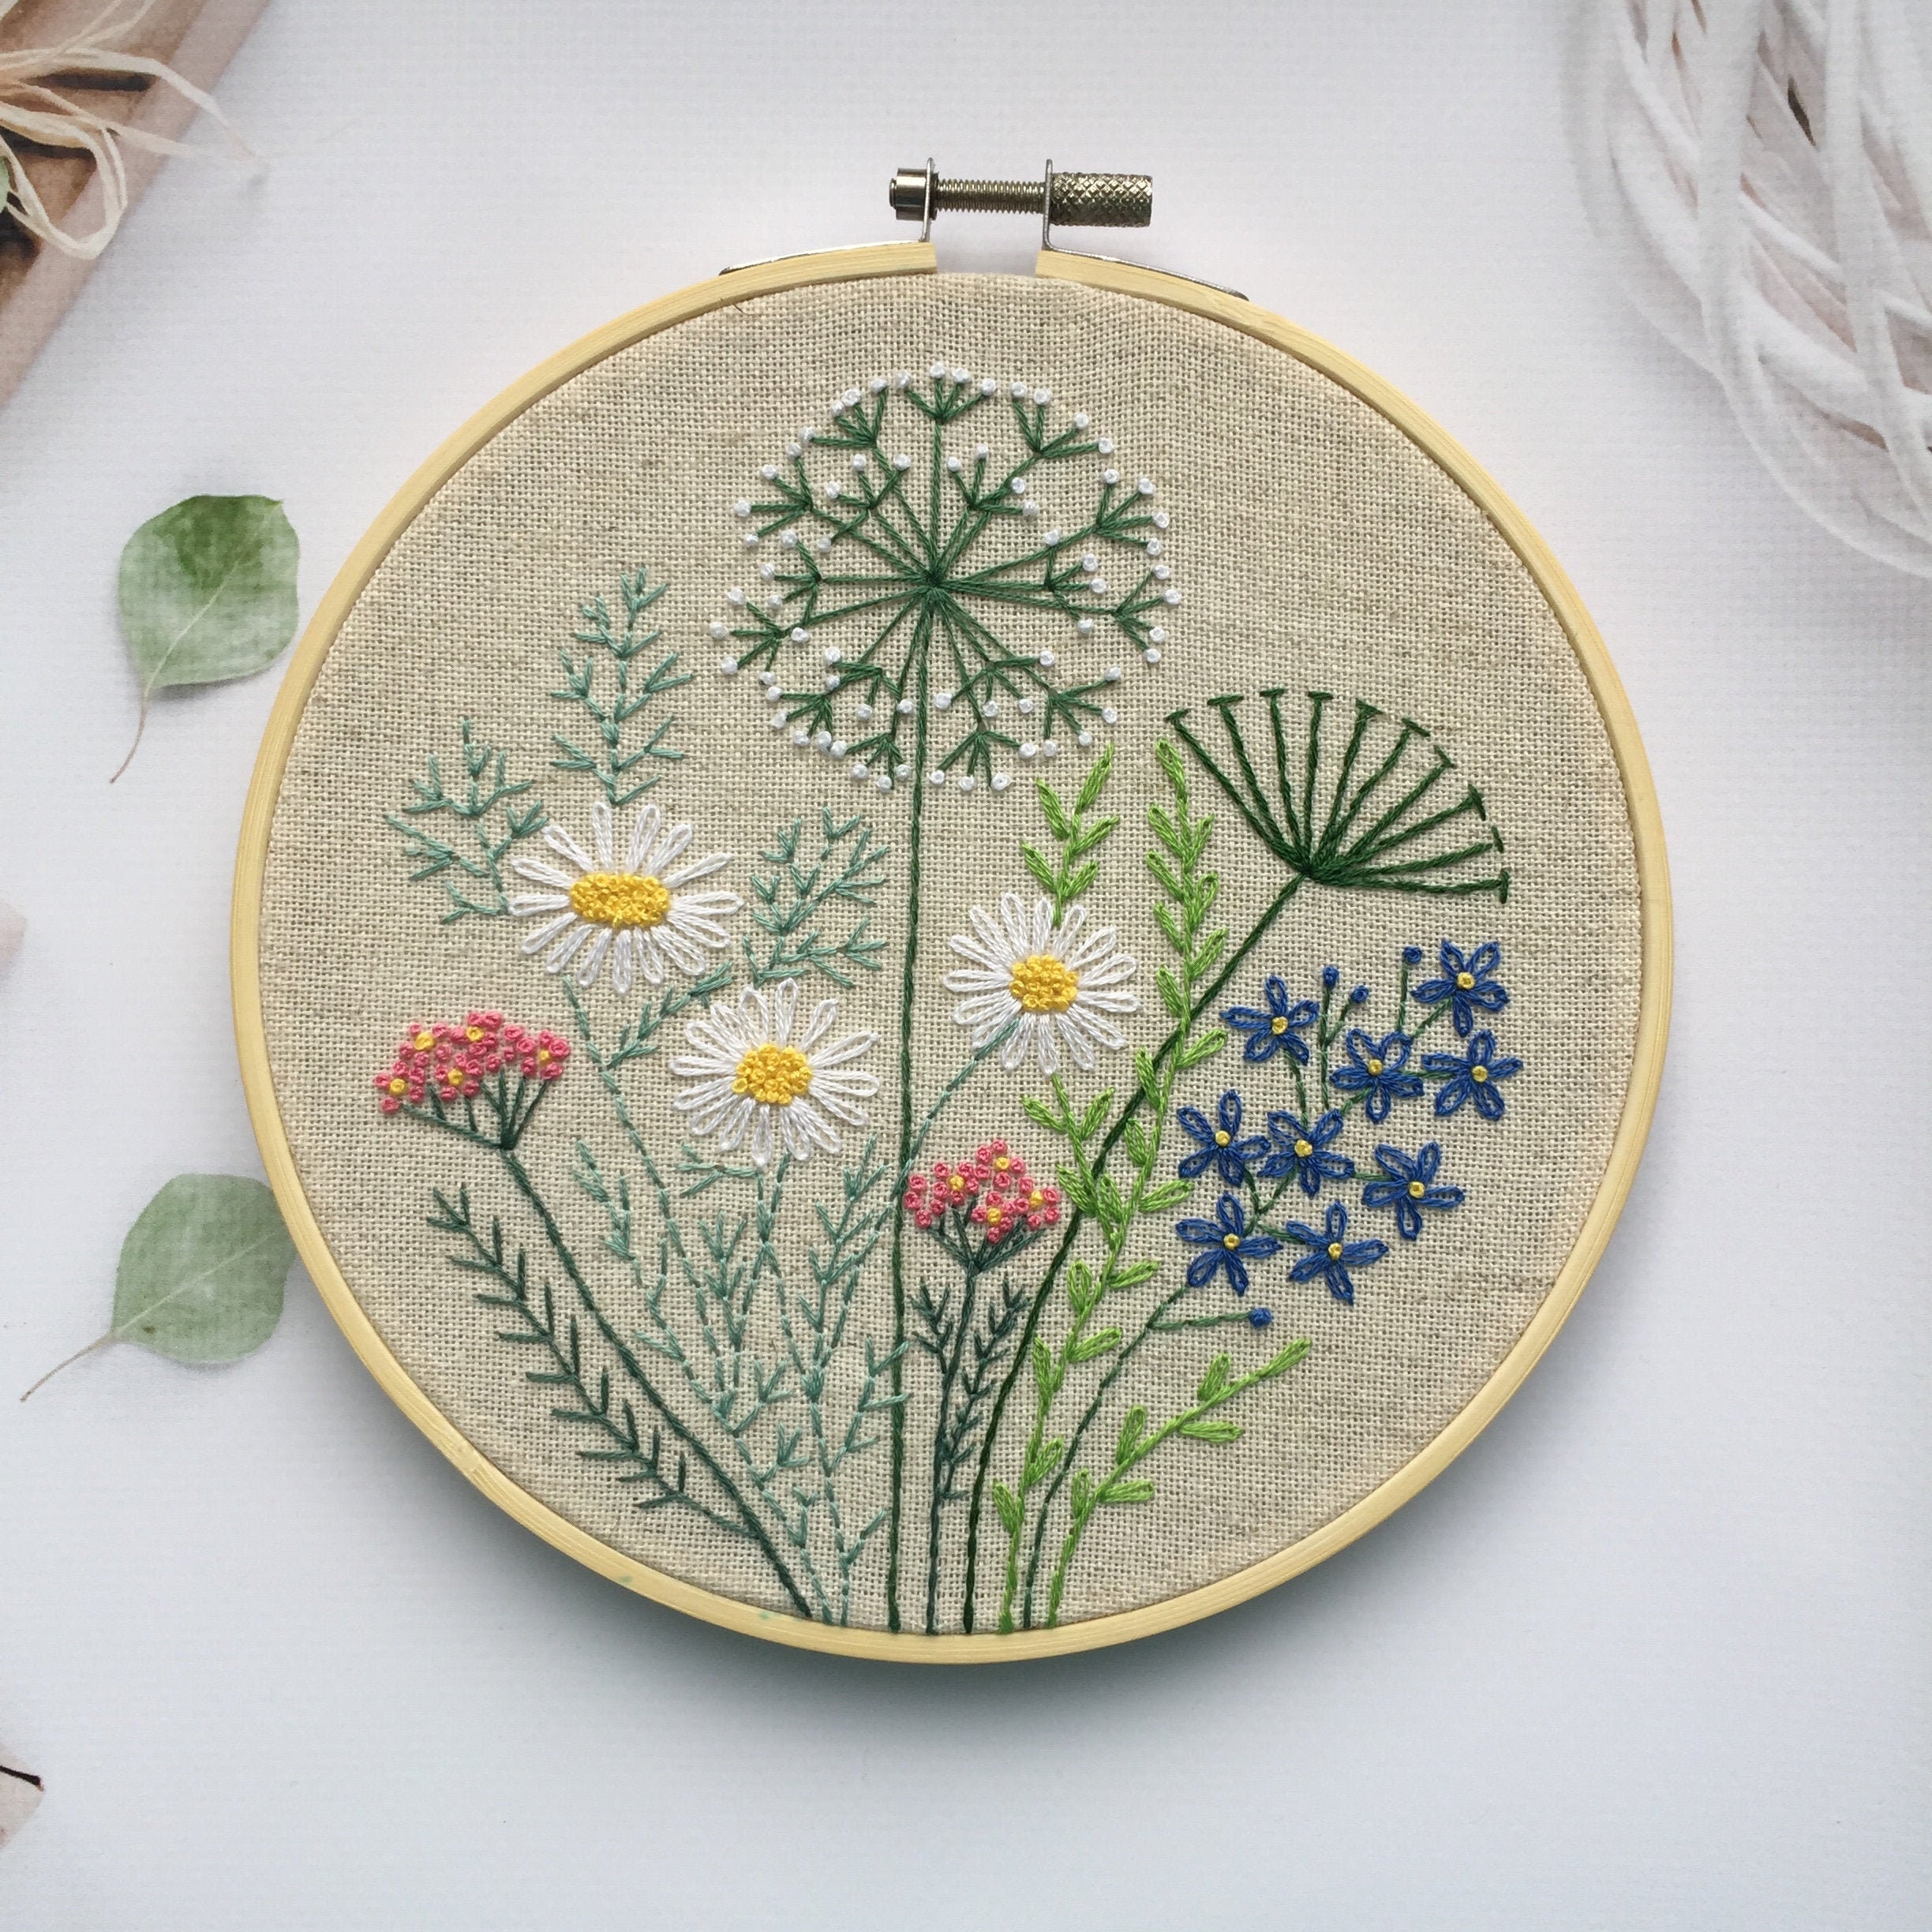 Creative Embroidery Flowers and Herbs Pattern 5, Needlepoint Floral Wall  Art PDF, DIY Round Botanical Design 